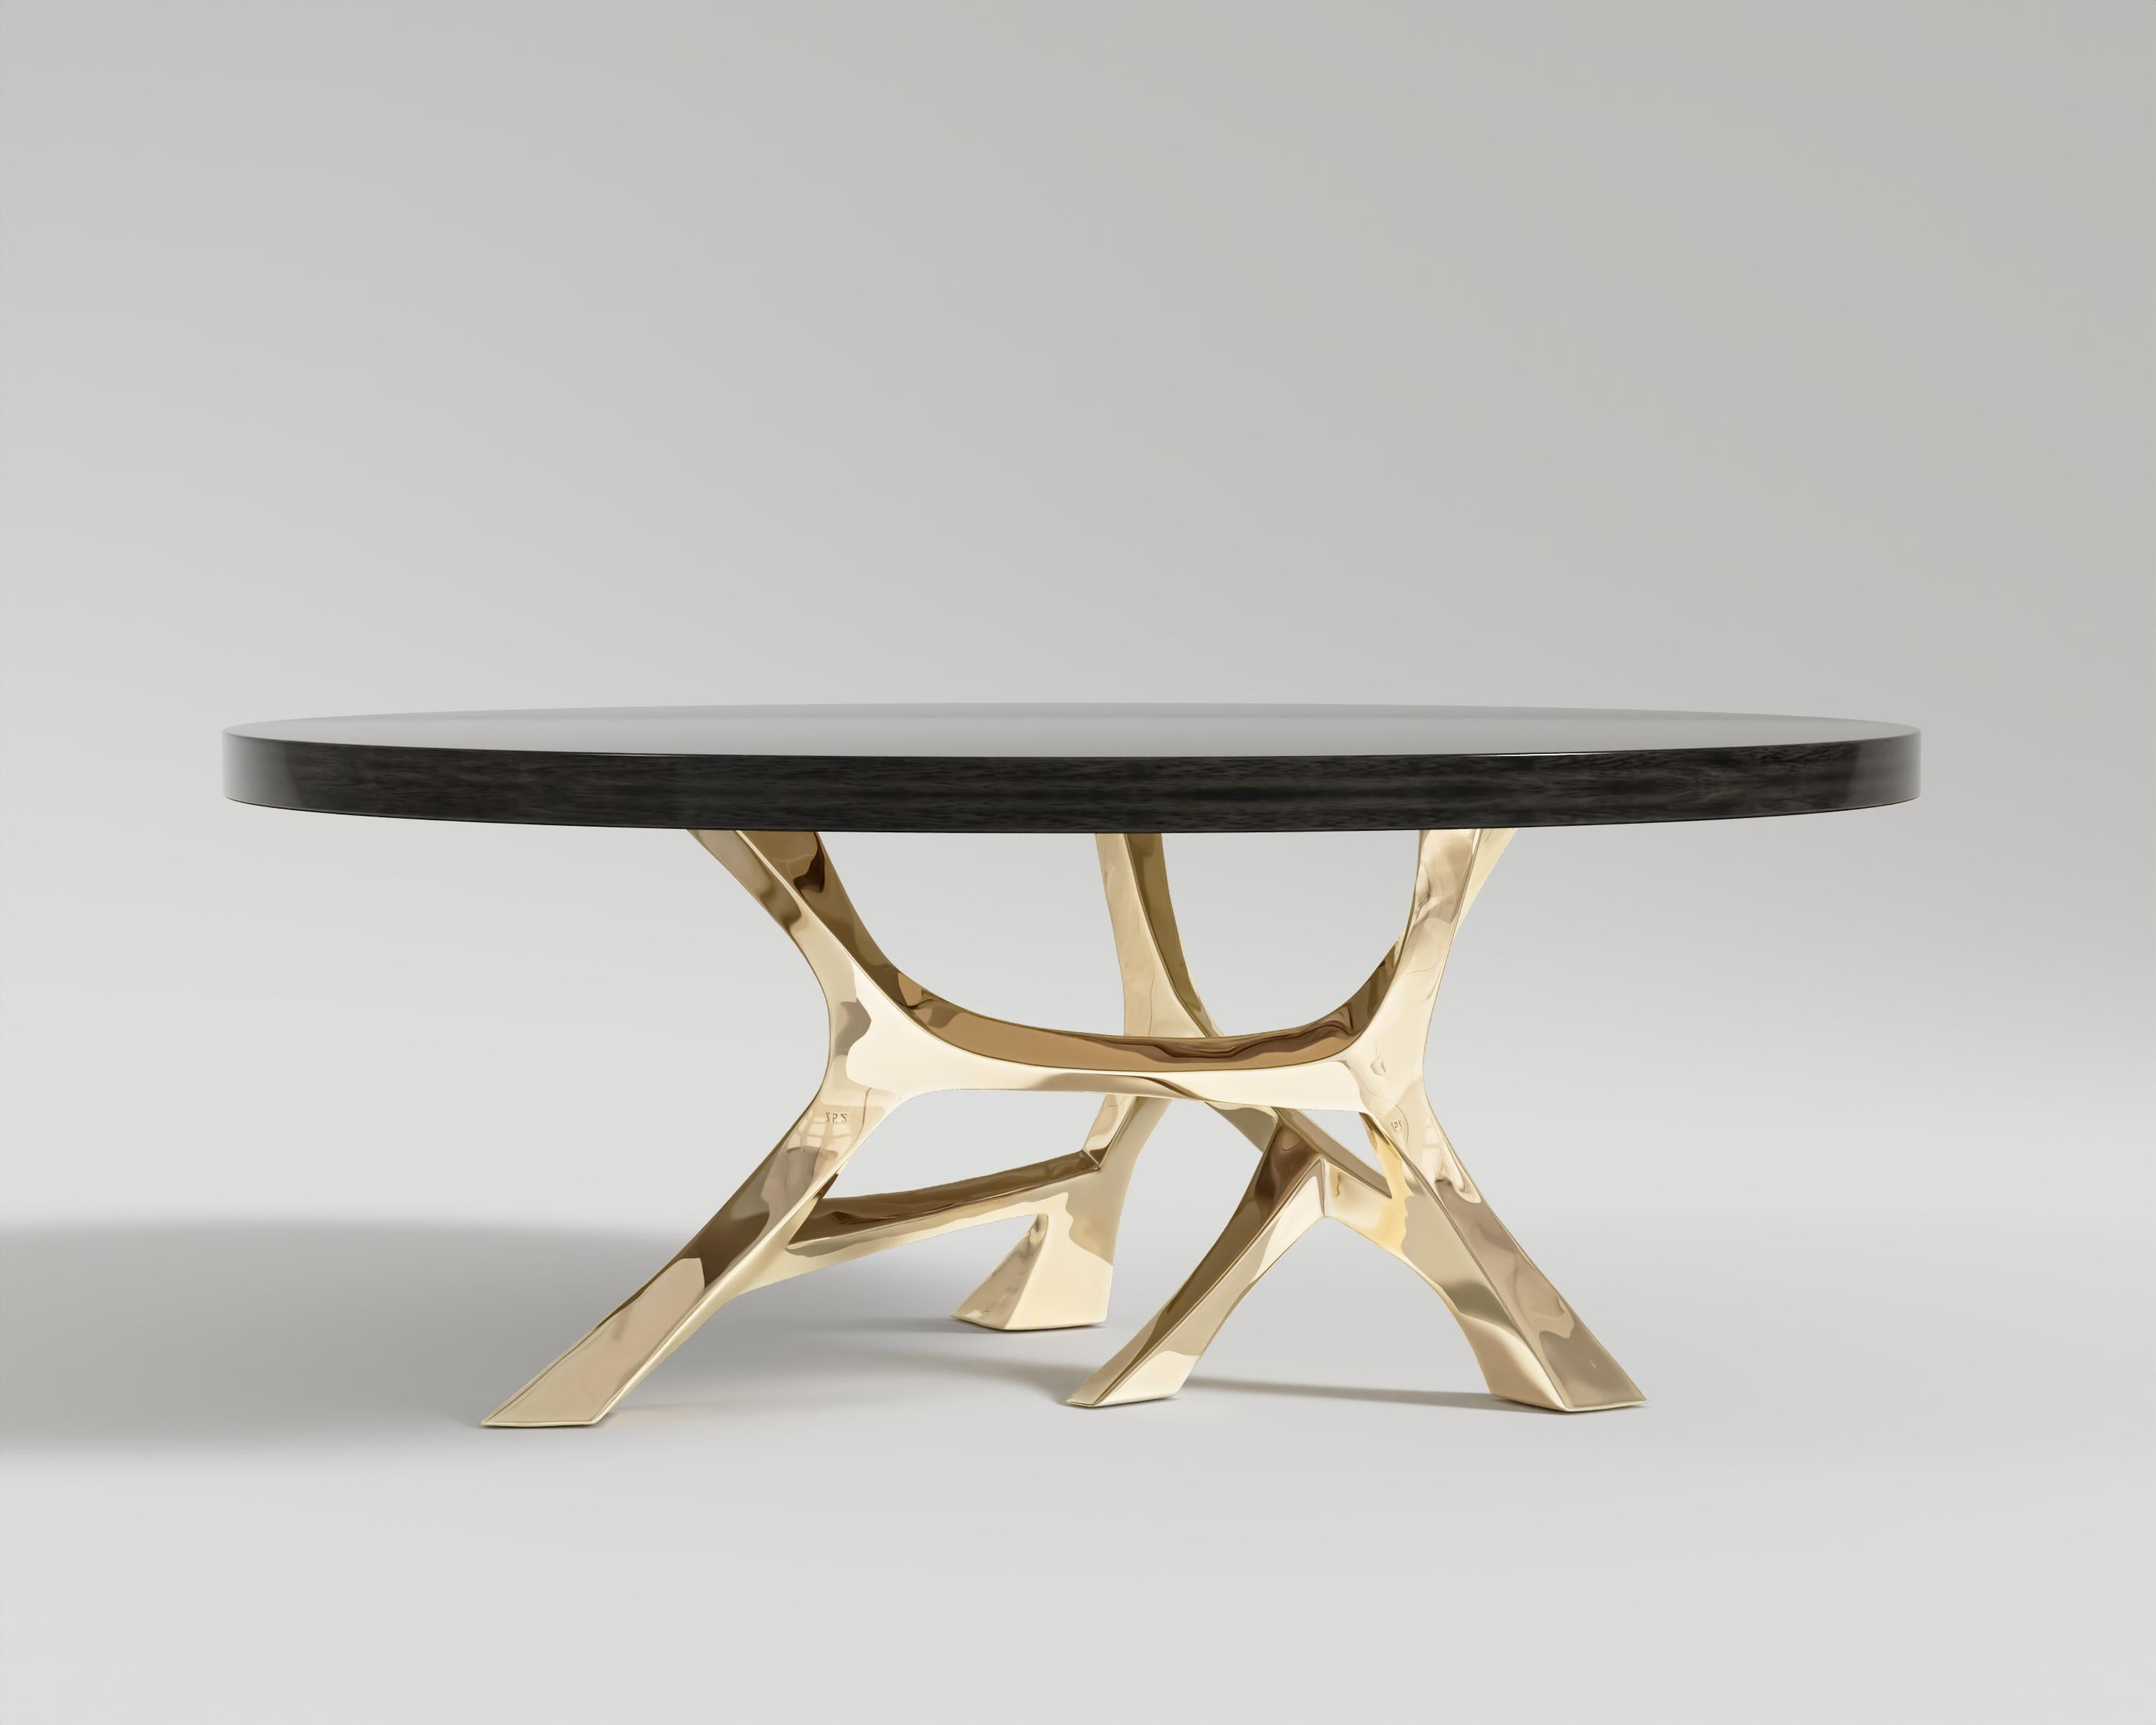 Vena Round Dining Table – Polished Bronze
Vena round dining table, which skillfully unites sophisticated style with
artfulness to give your dining area charm. Artfully designed with keen attention to finer detail, said table becomes a work of art